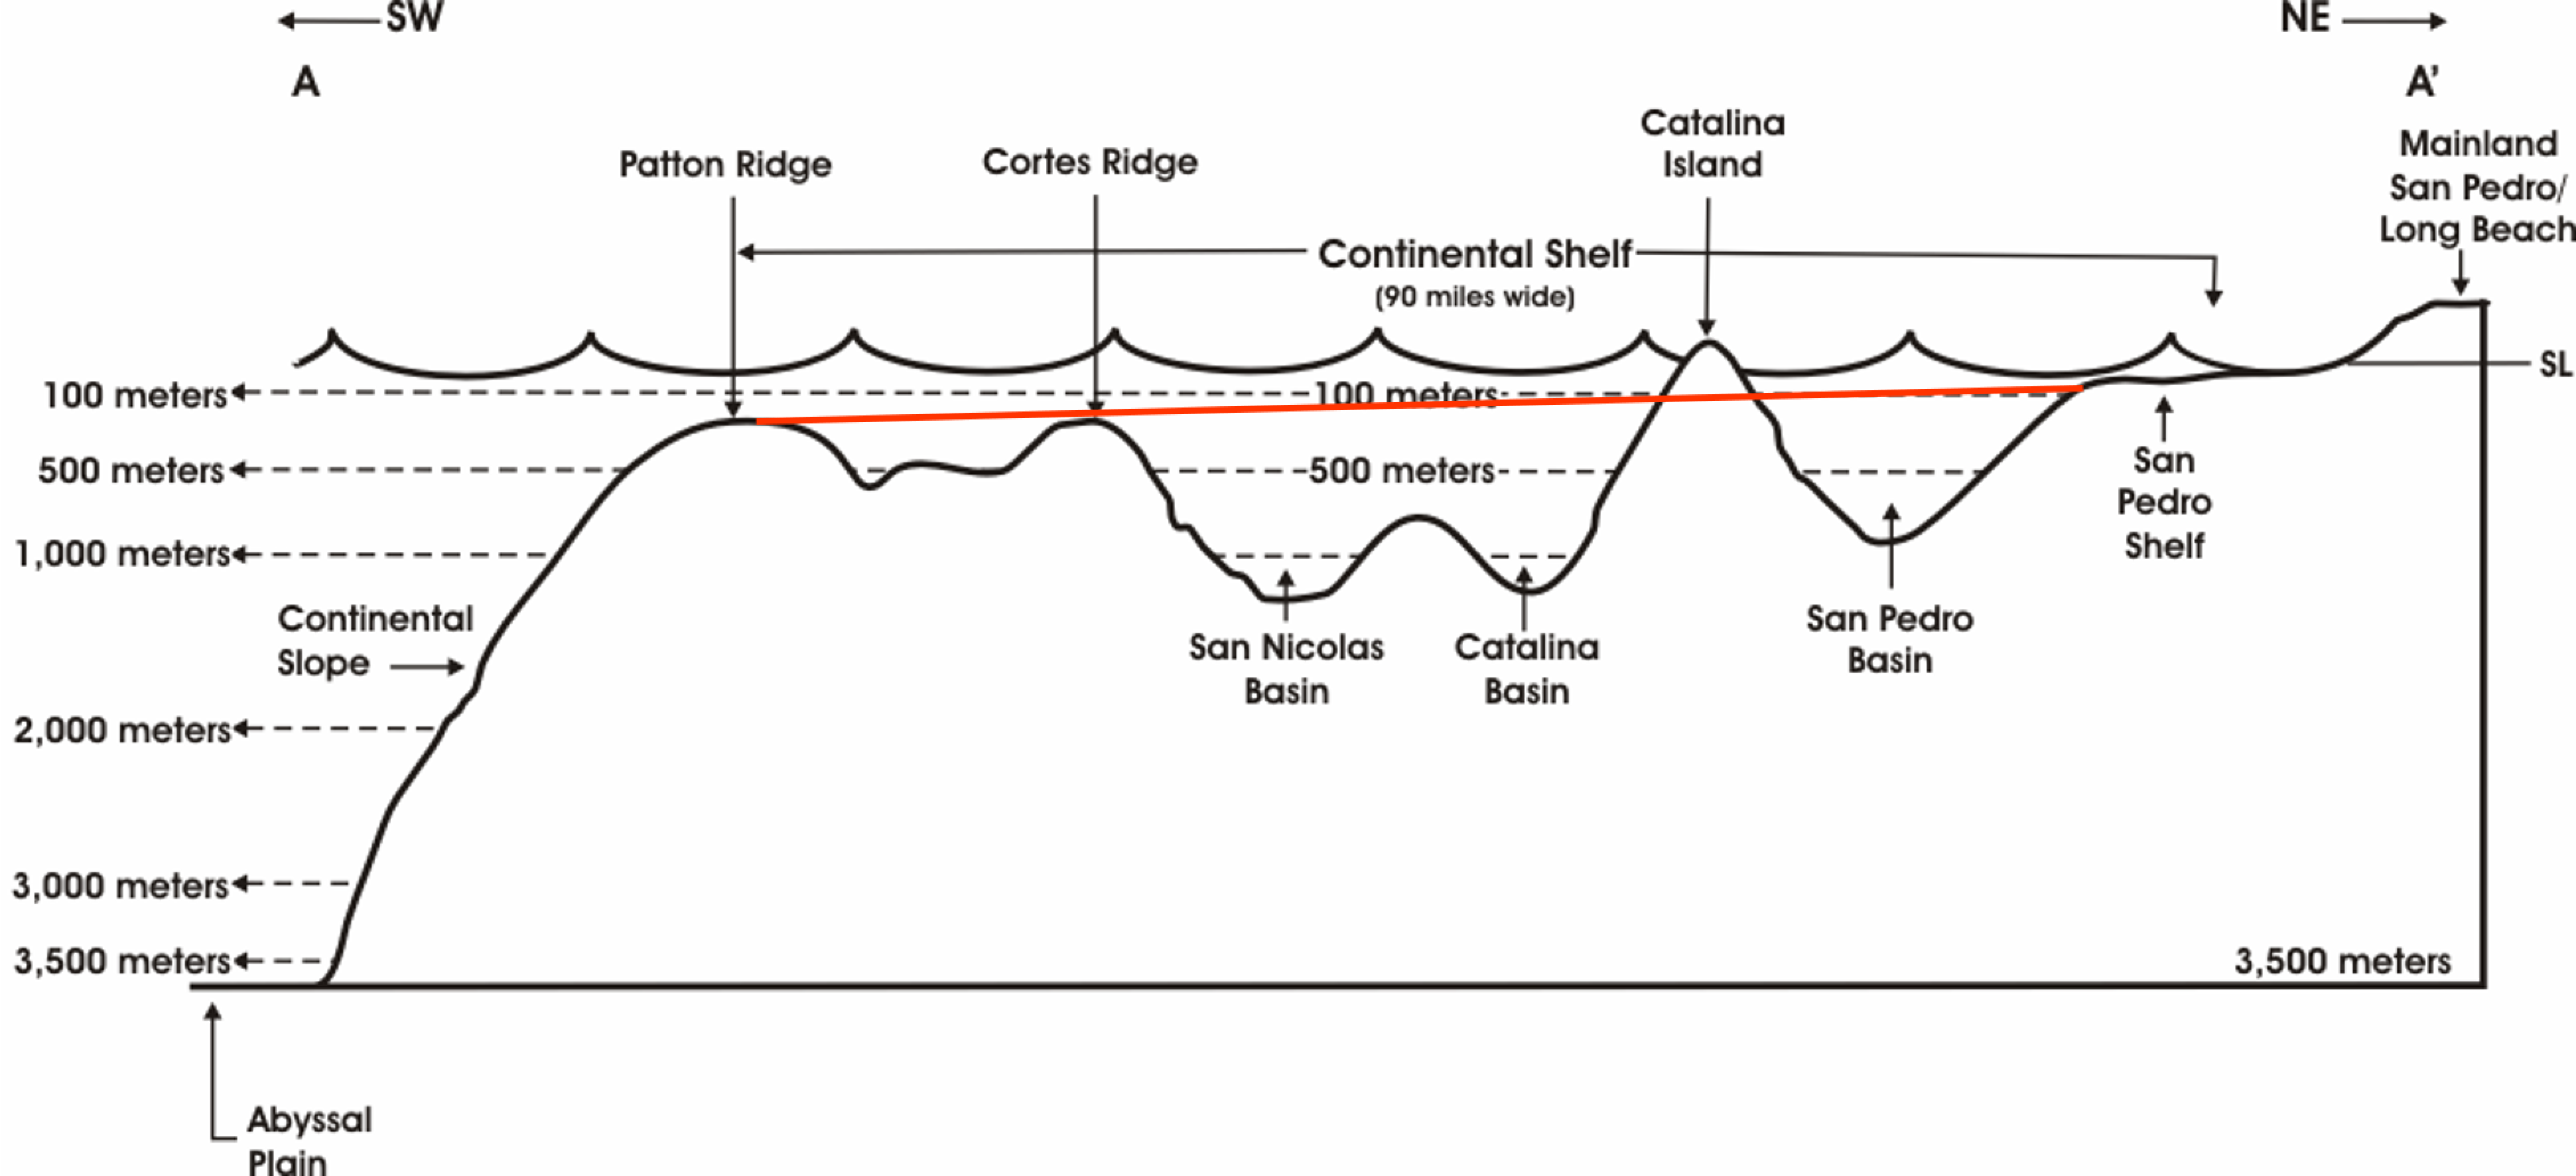 Cross section of the Southern California continental shelf